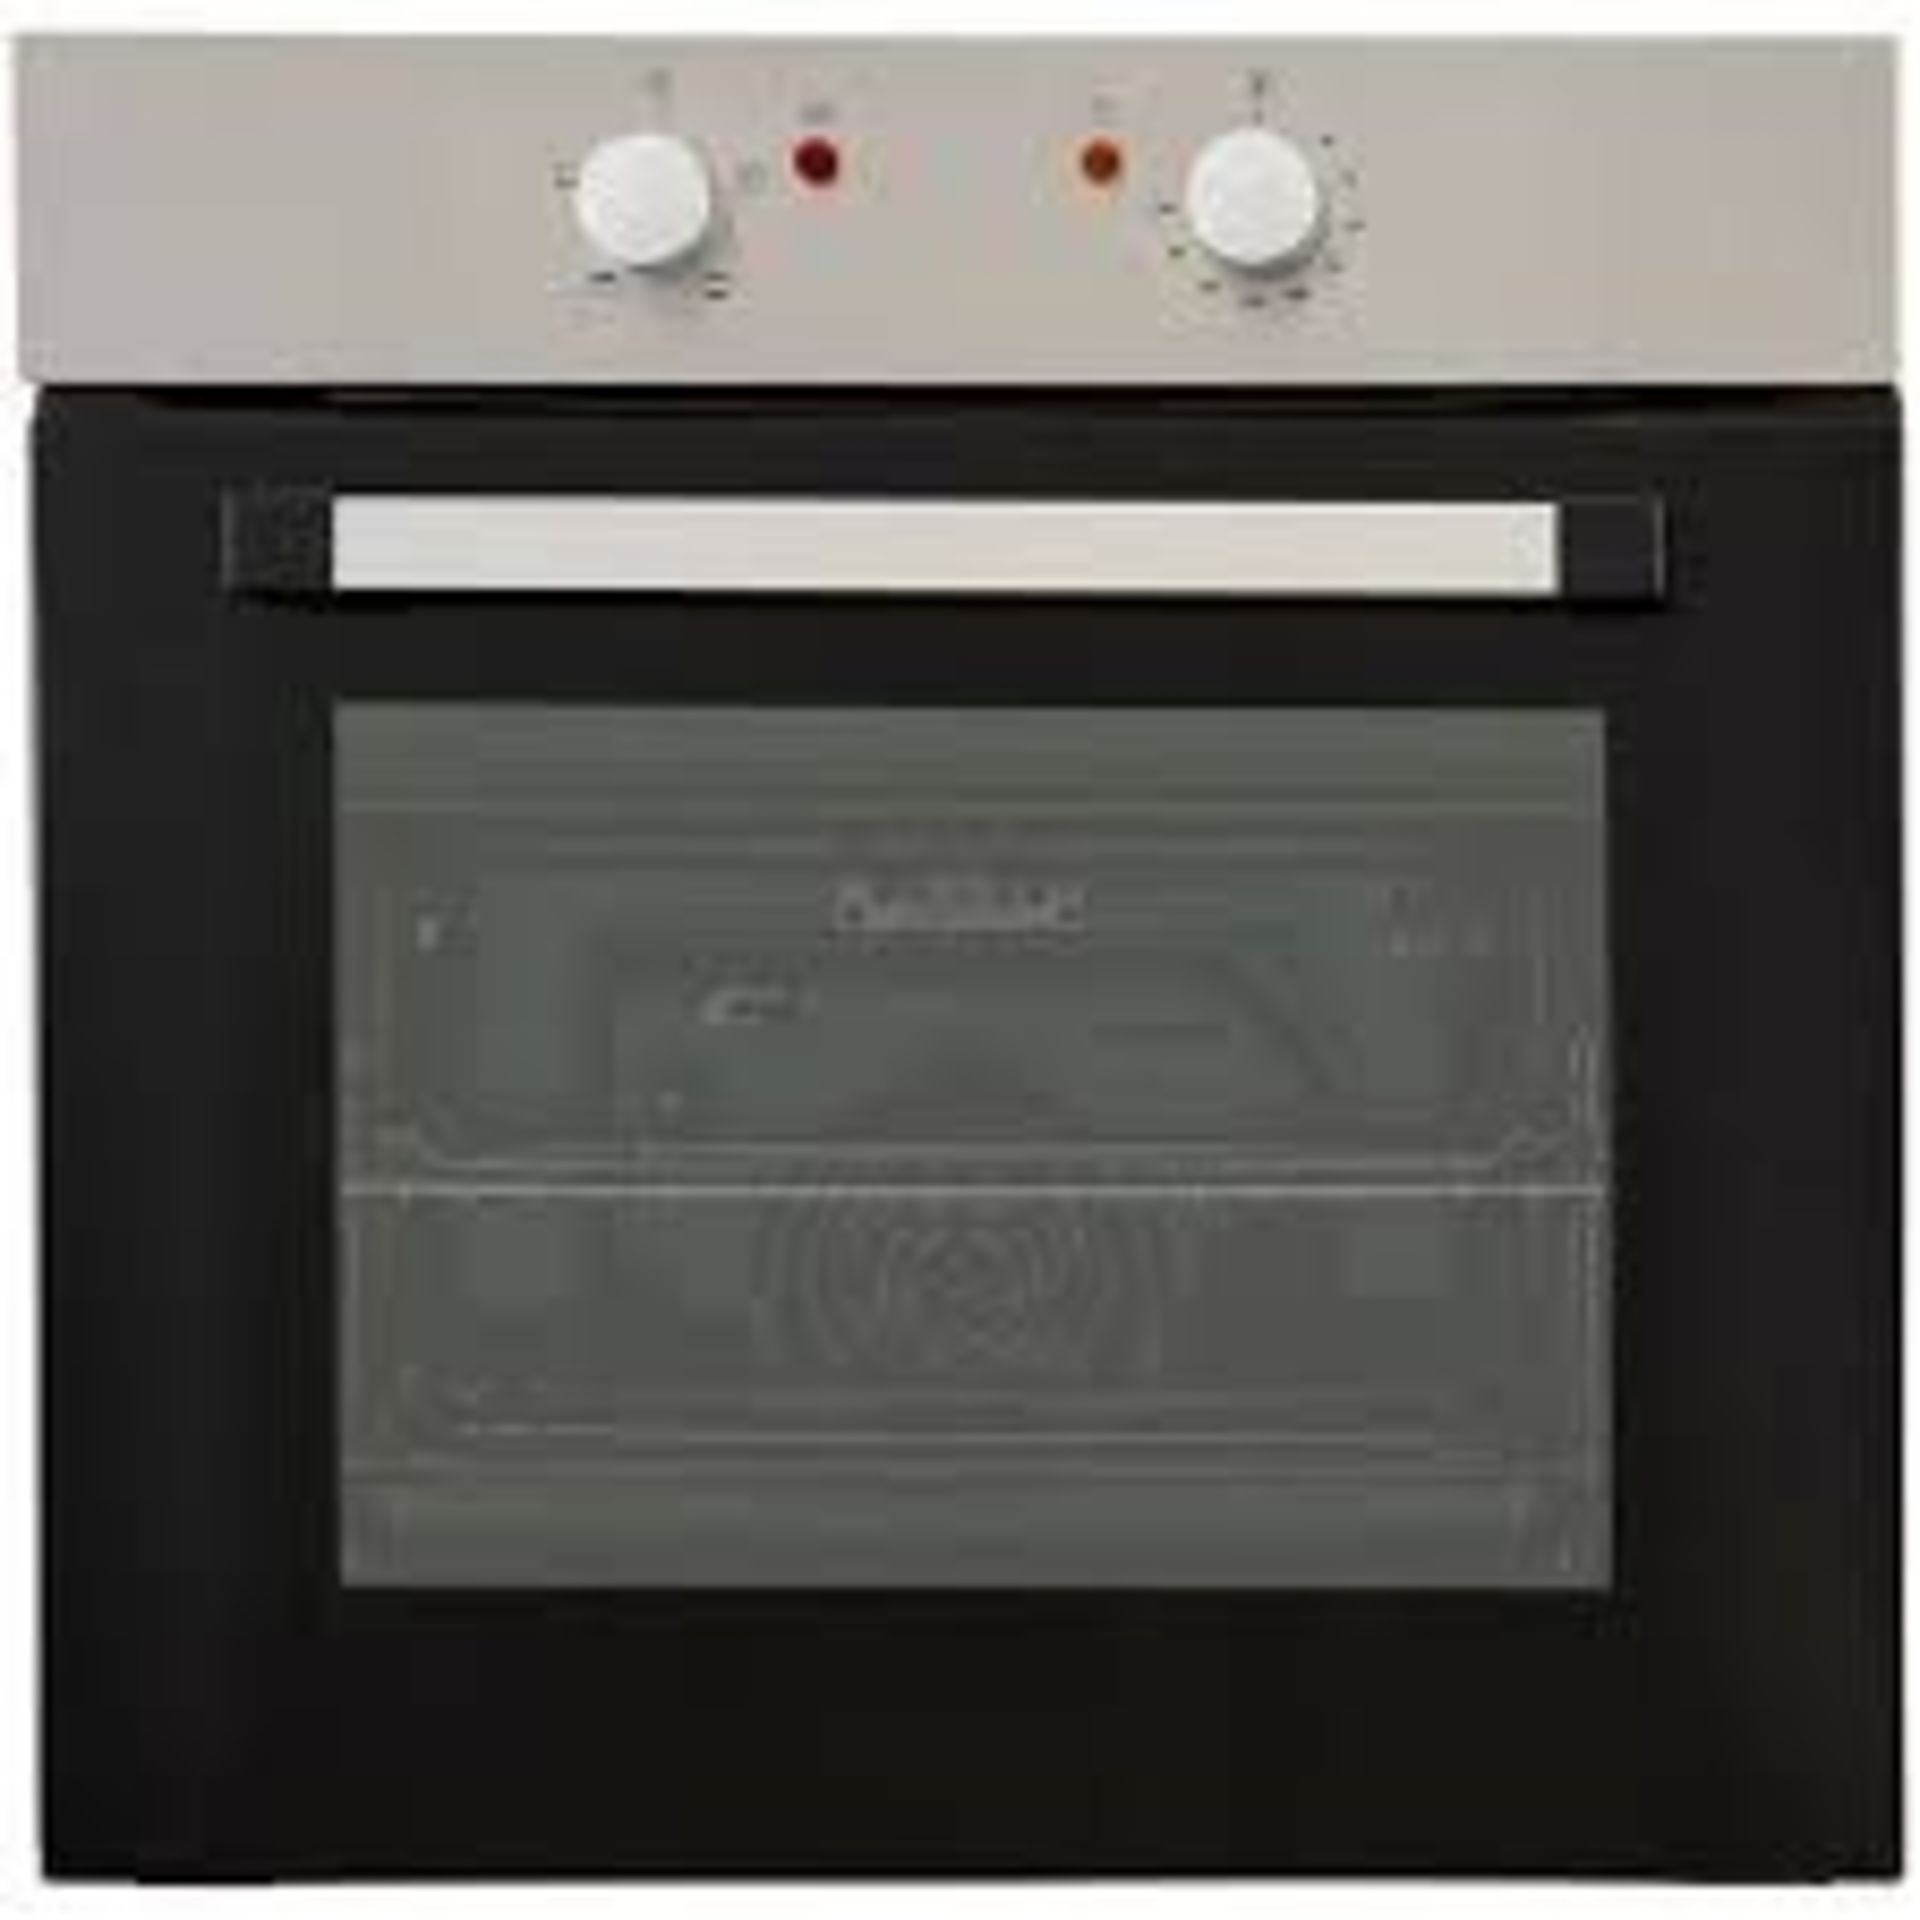 Cooke & Lewis CSB60A Built-in Single Conventional Oven - Chrome effect. - R9BW. This conventional,